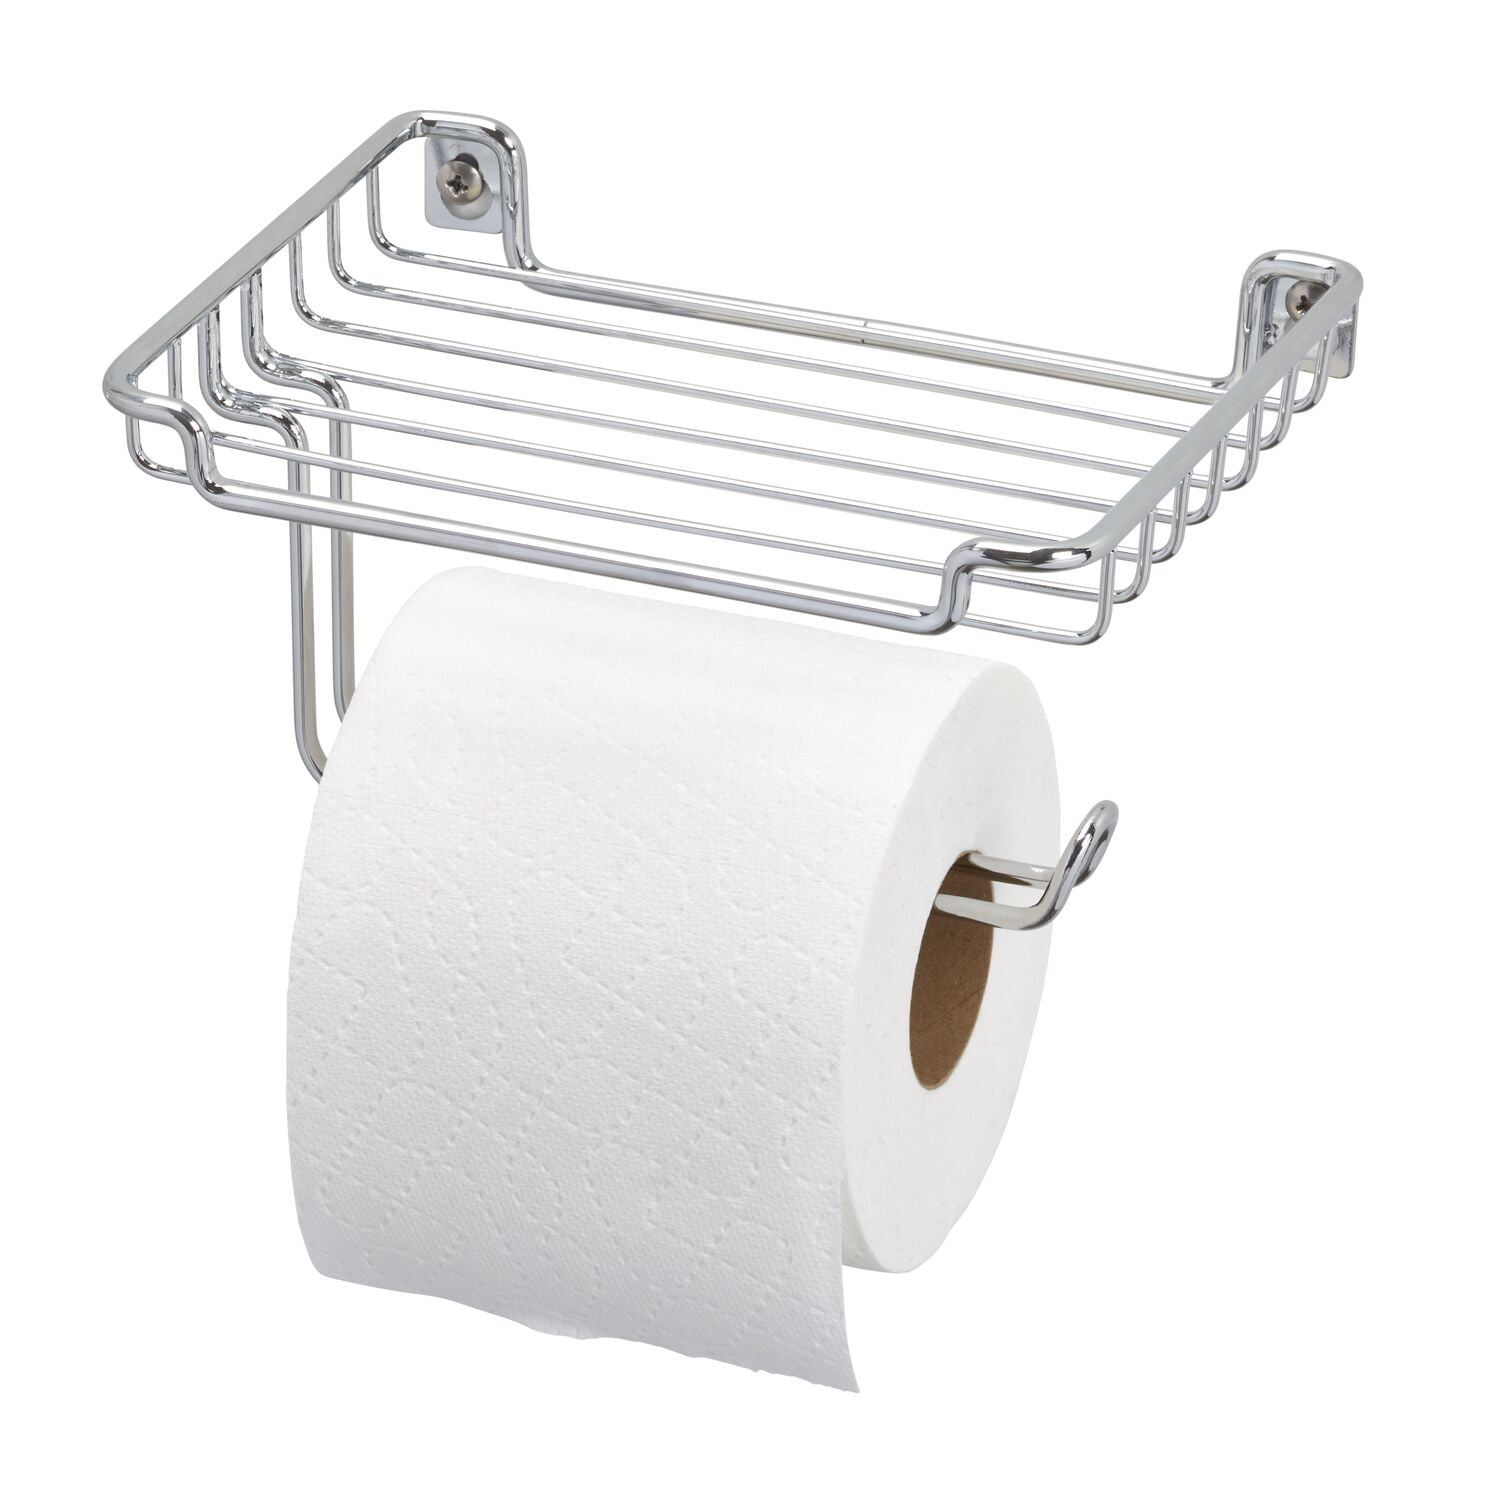 NEW Talking Toilet Paper Spindle Fits Most Toilet Paper Holders 